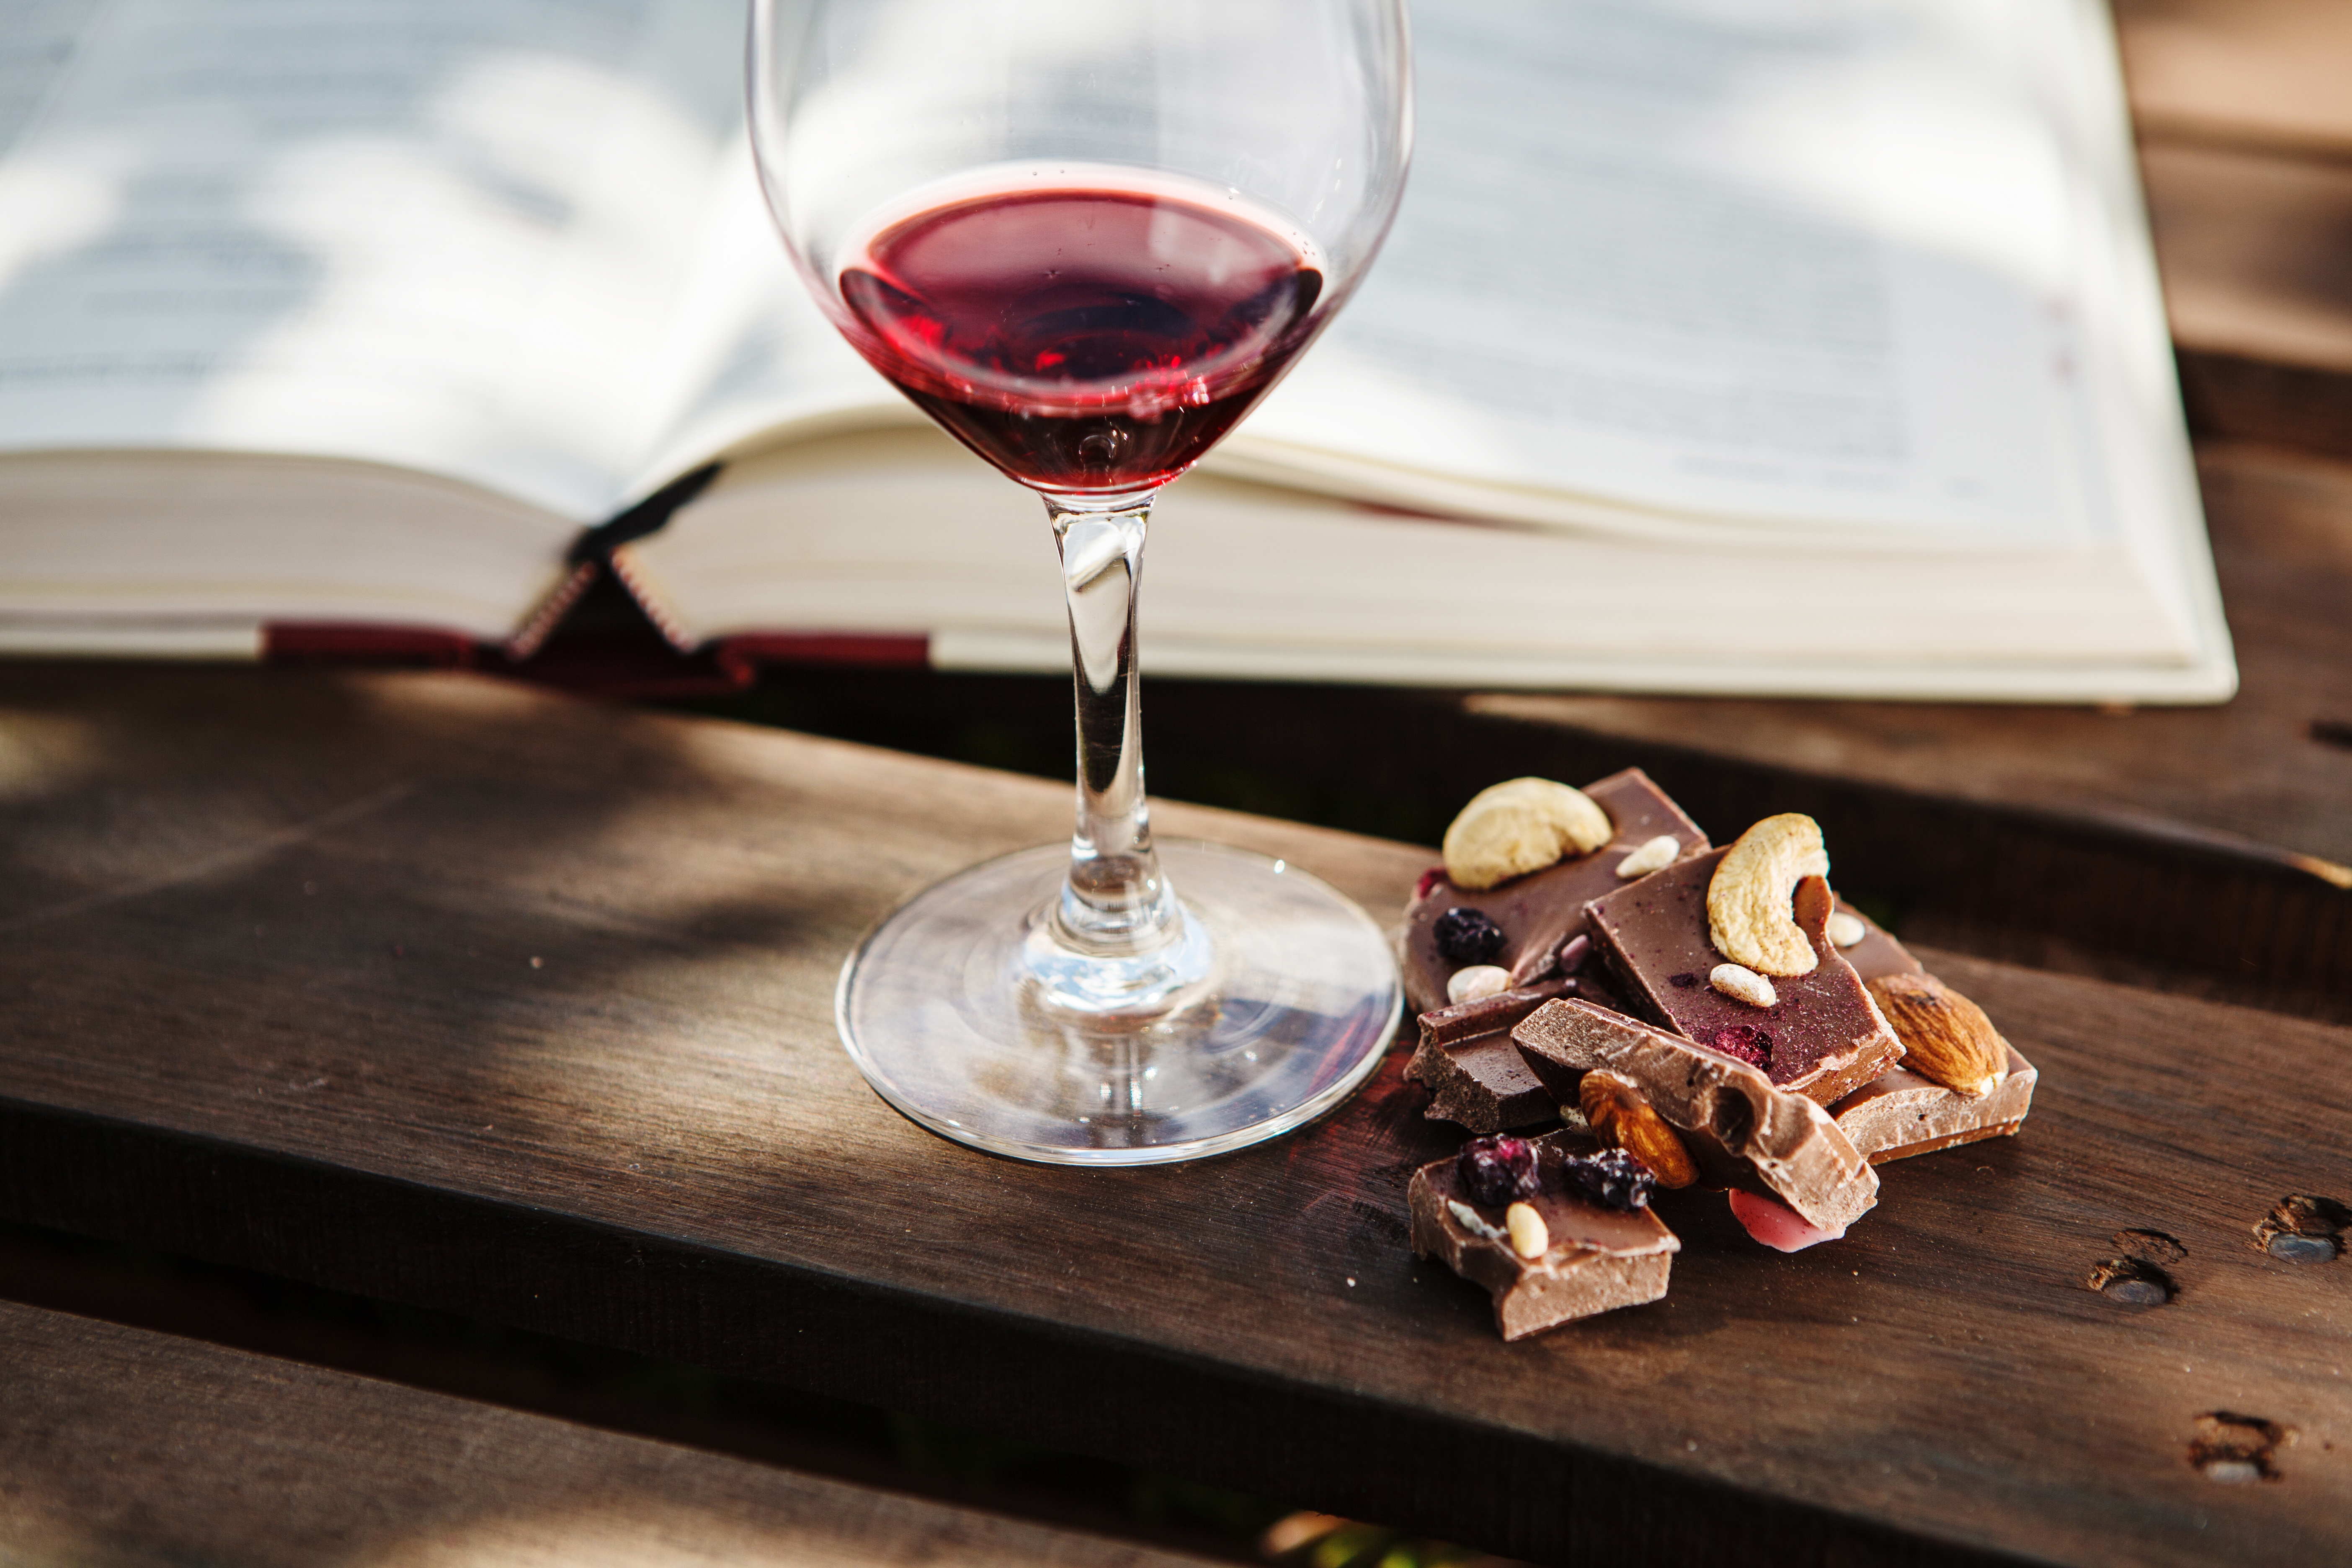 A glass of red wine with pieces of delicious-looking chocolate